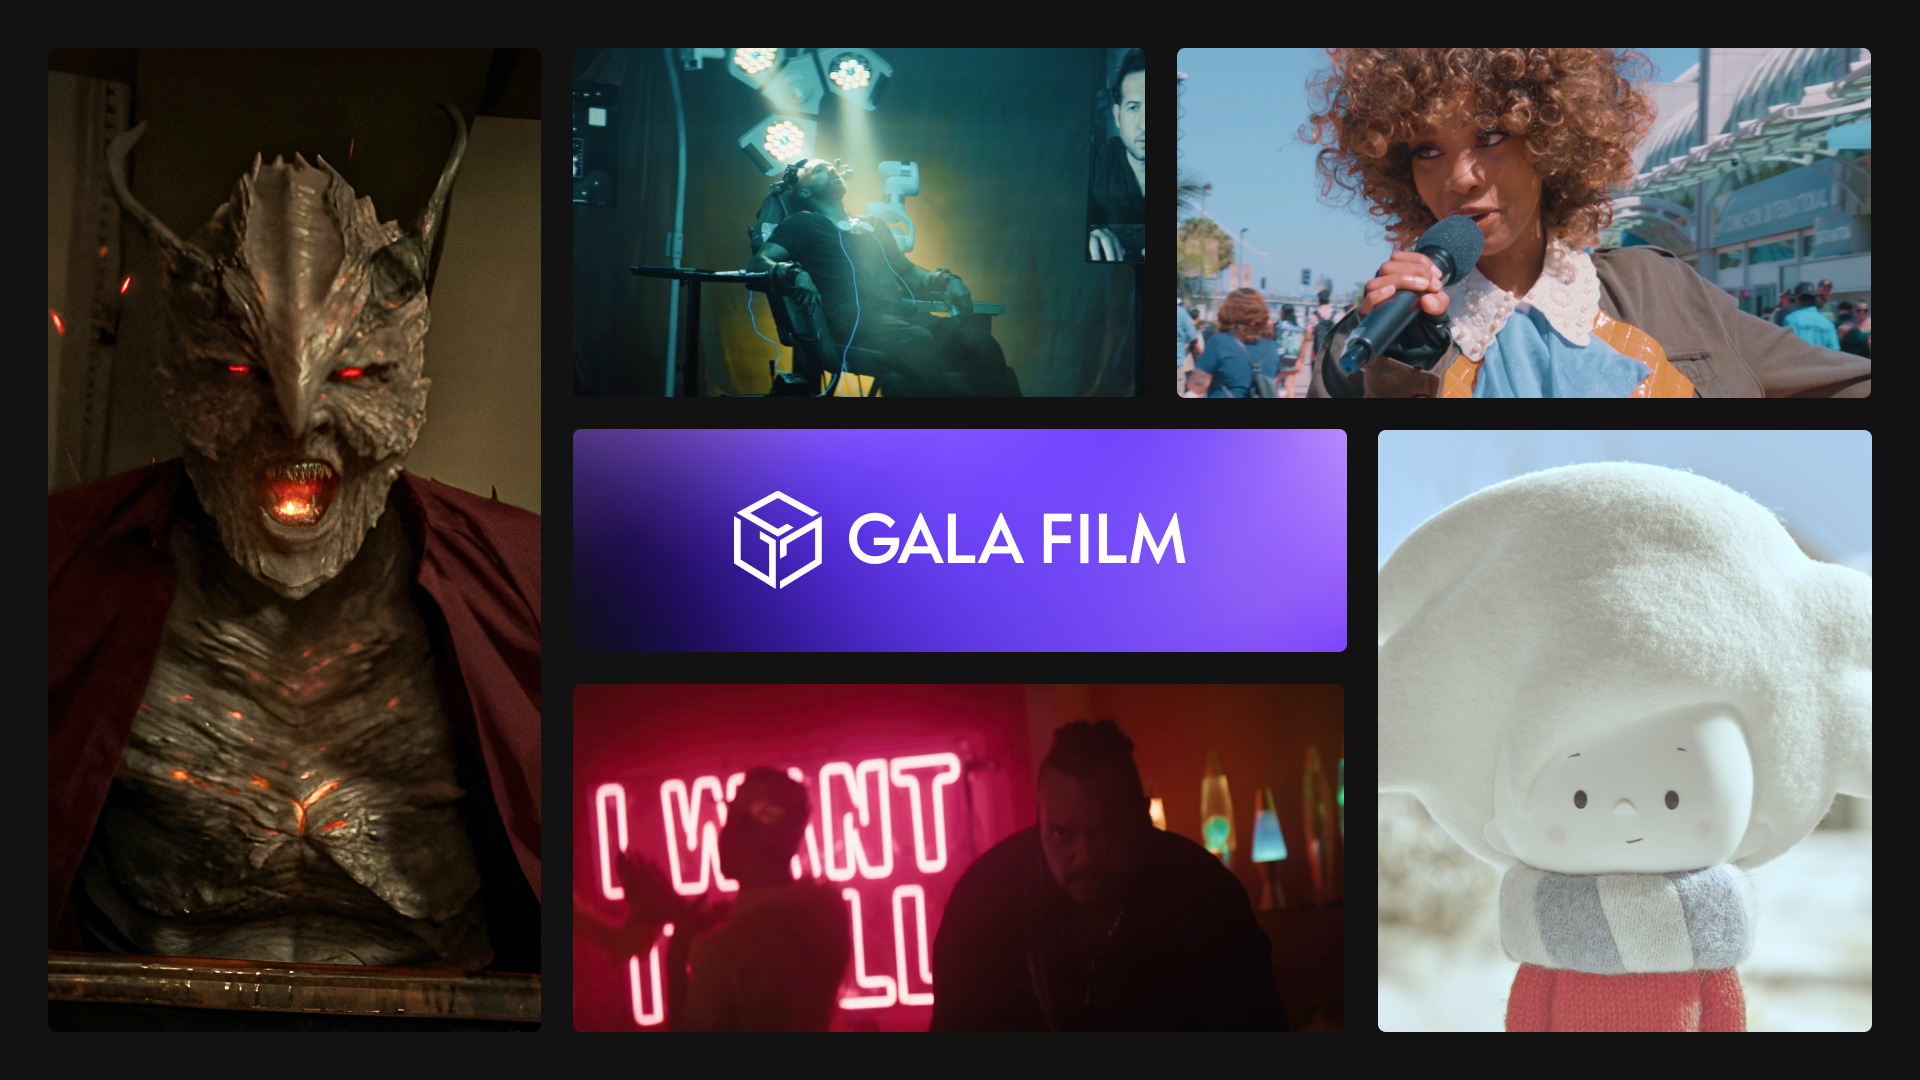 Gala Film is empowering users through web3 tech to watch, unlock, host, and own.